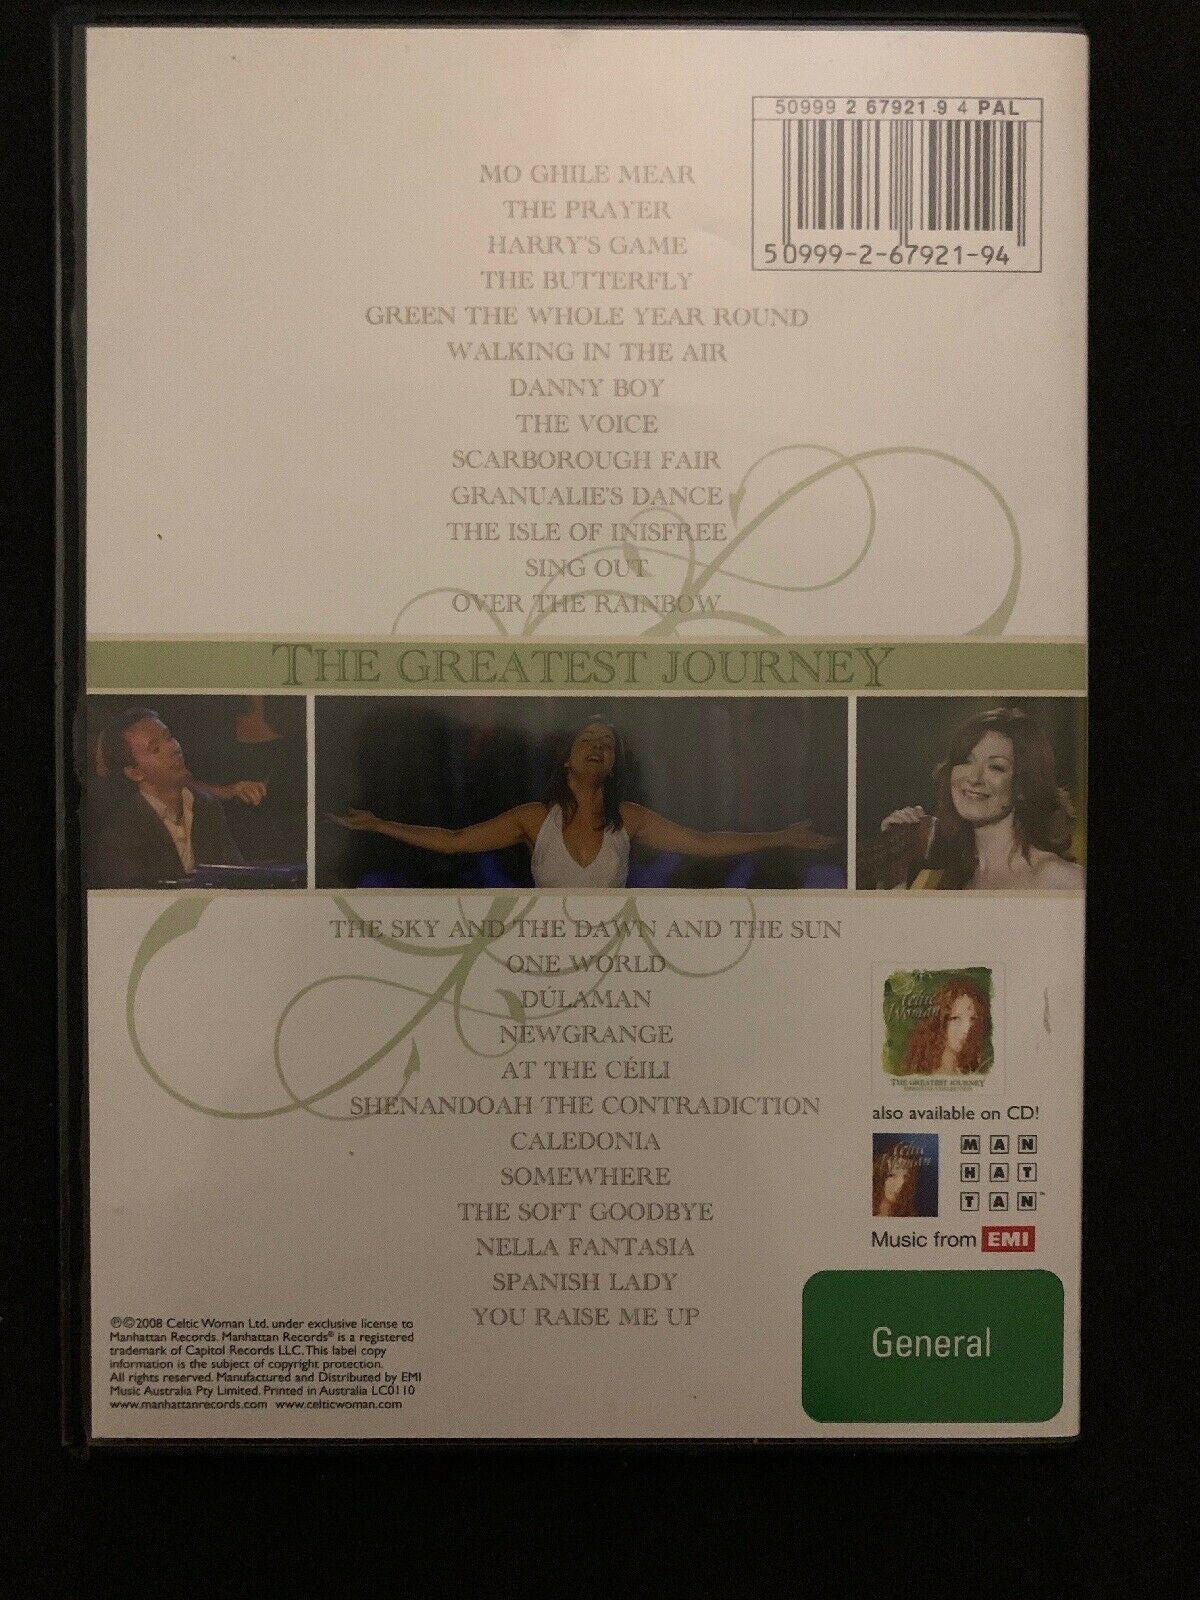 CELTIC WOMAN - The Greatest Journey DVD! Essential Collection. Region Free